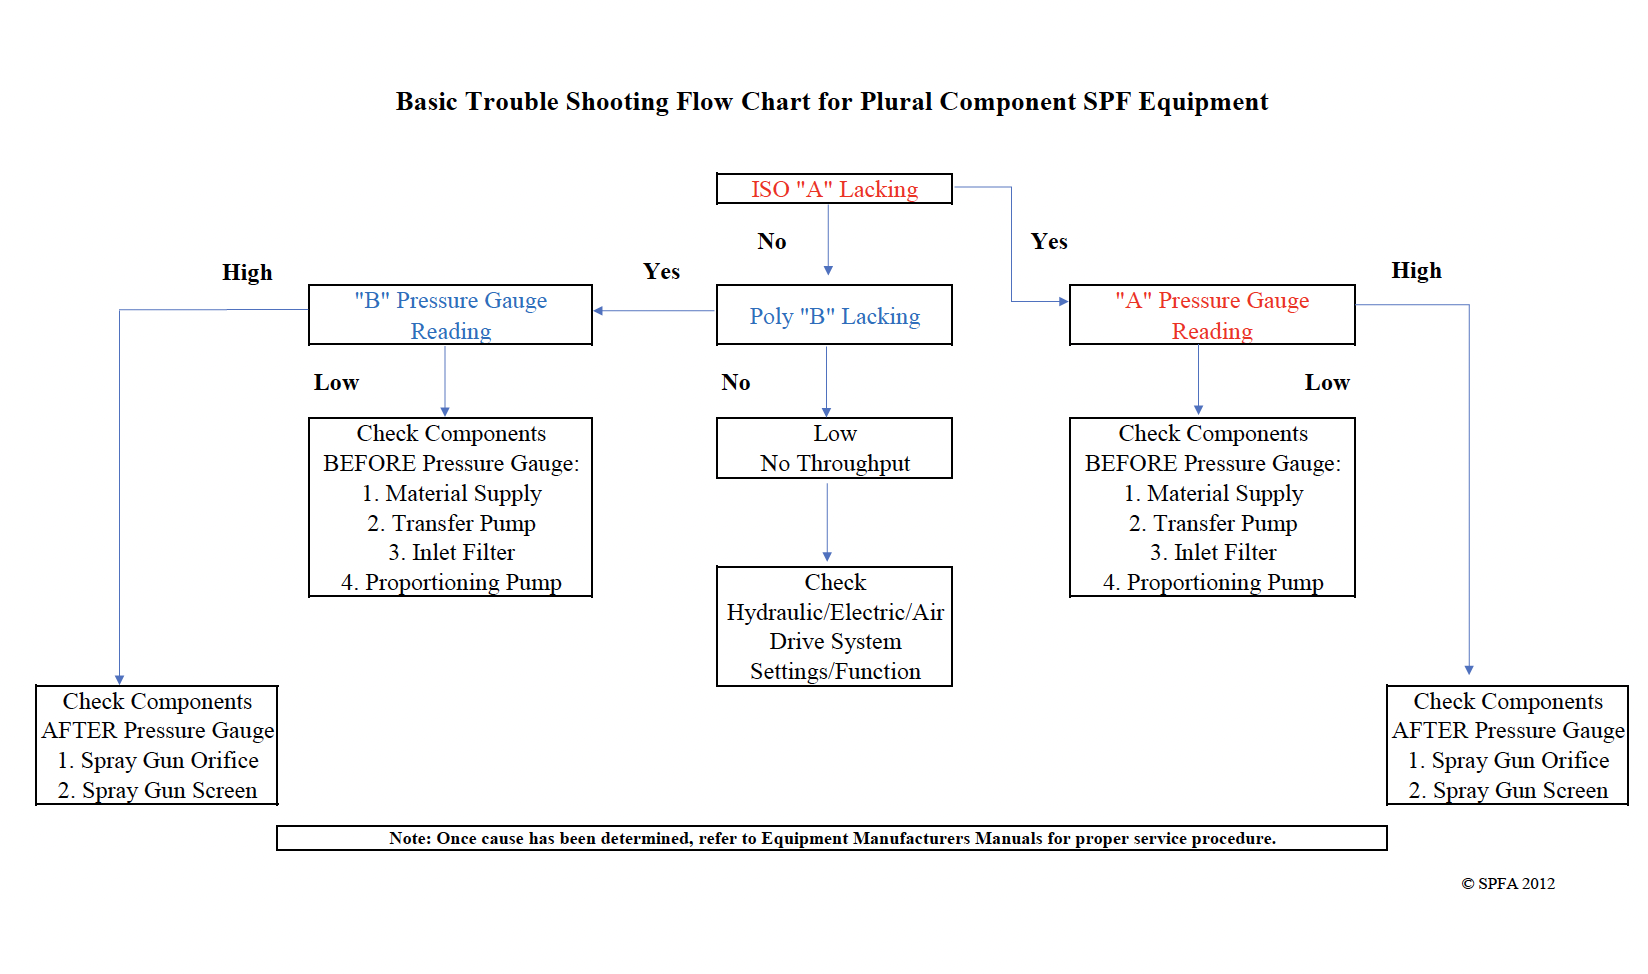 Basic Trouble Shooting Flow Chart for Plural Component SPF Equipment